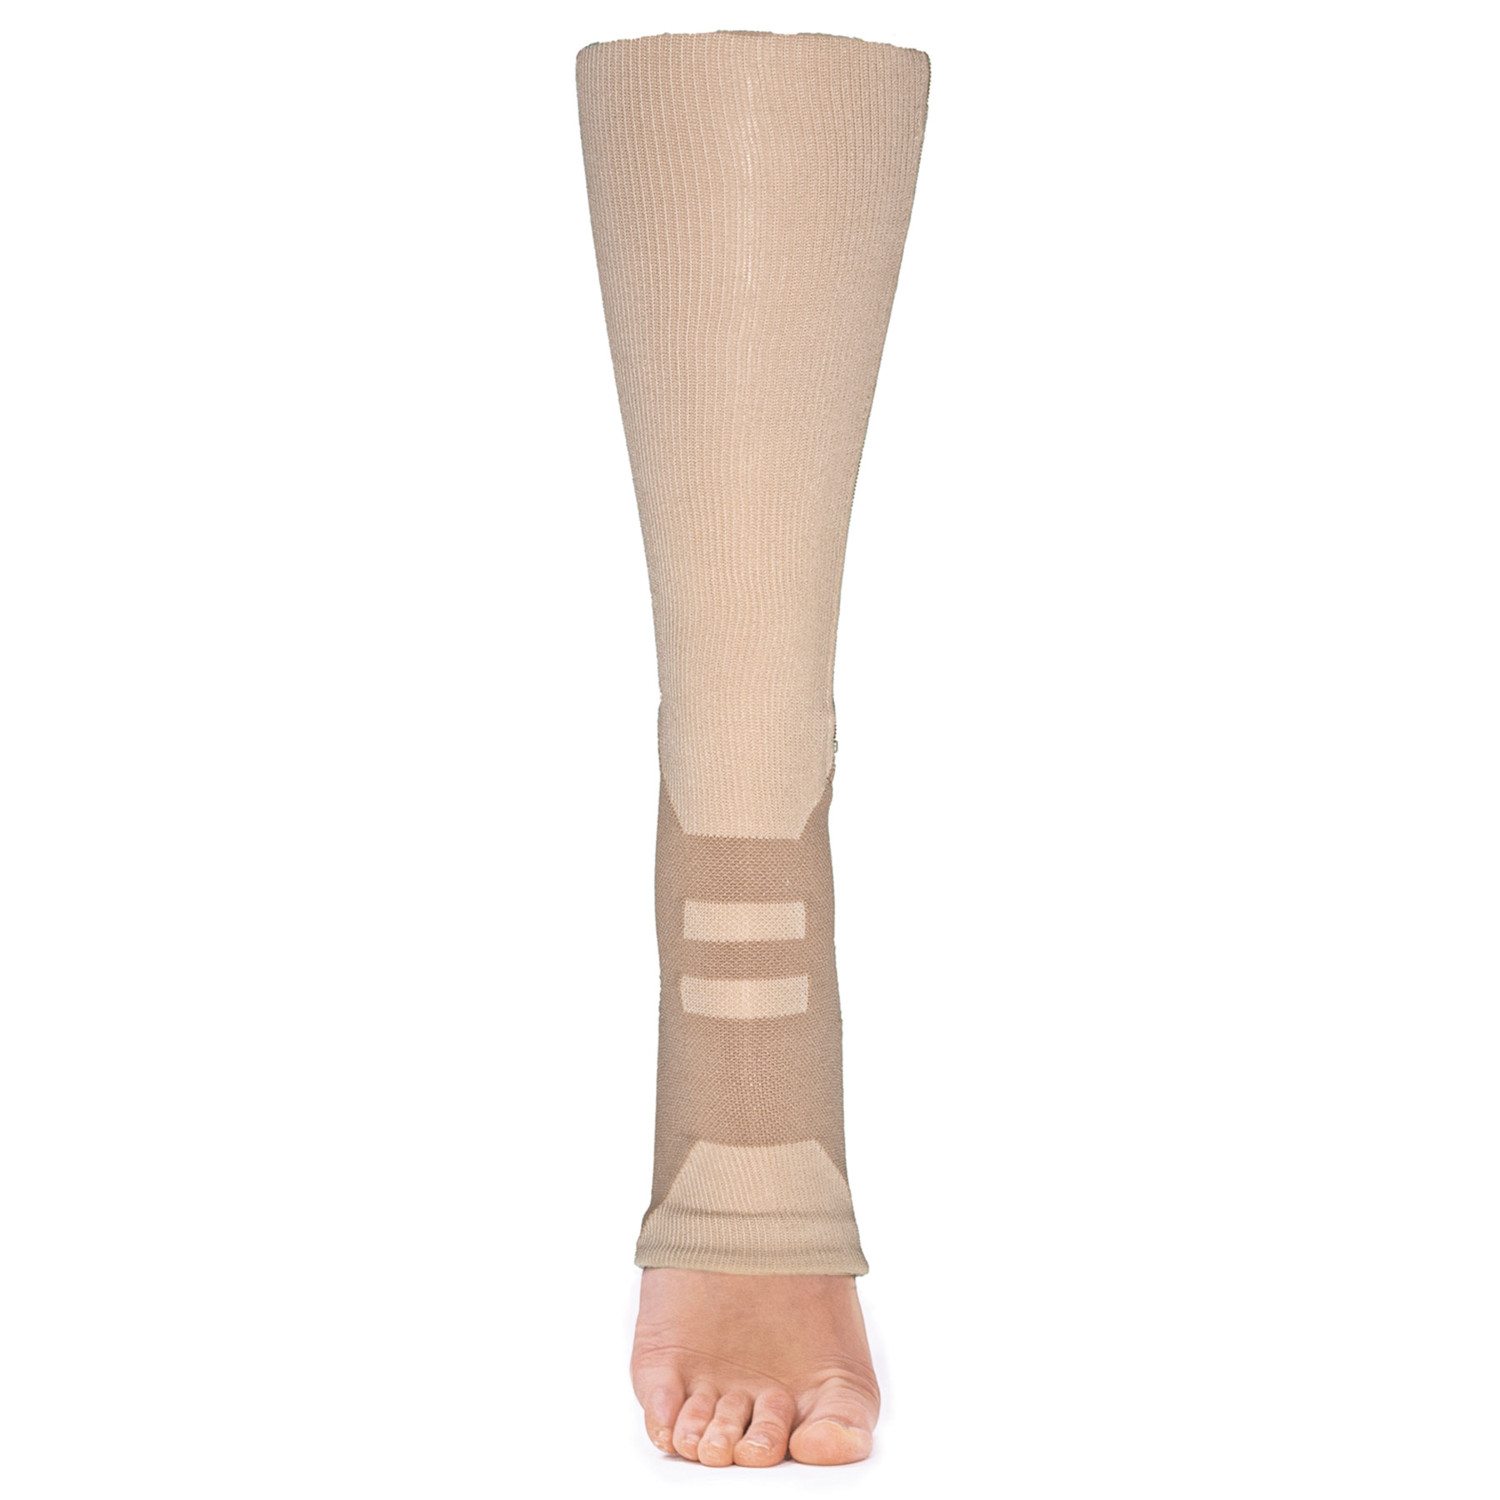 benefits of compression socks for arch support